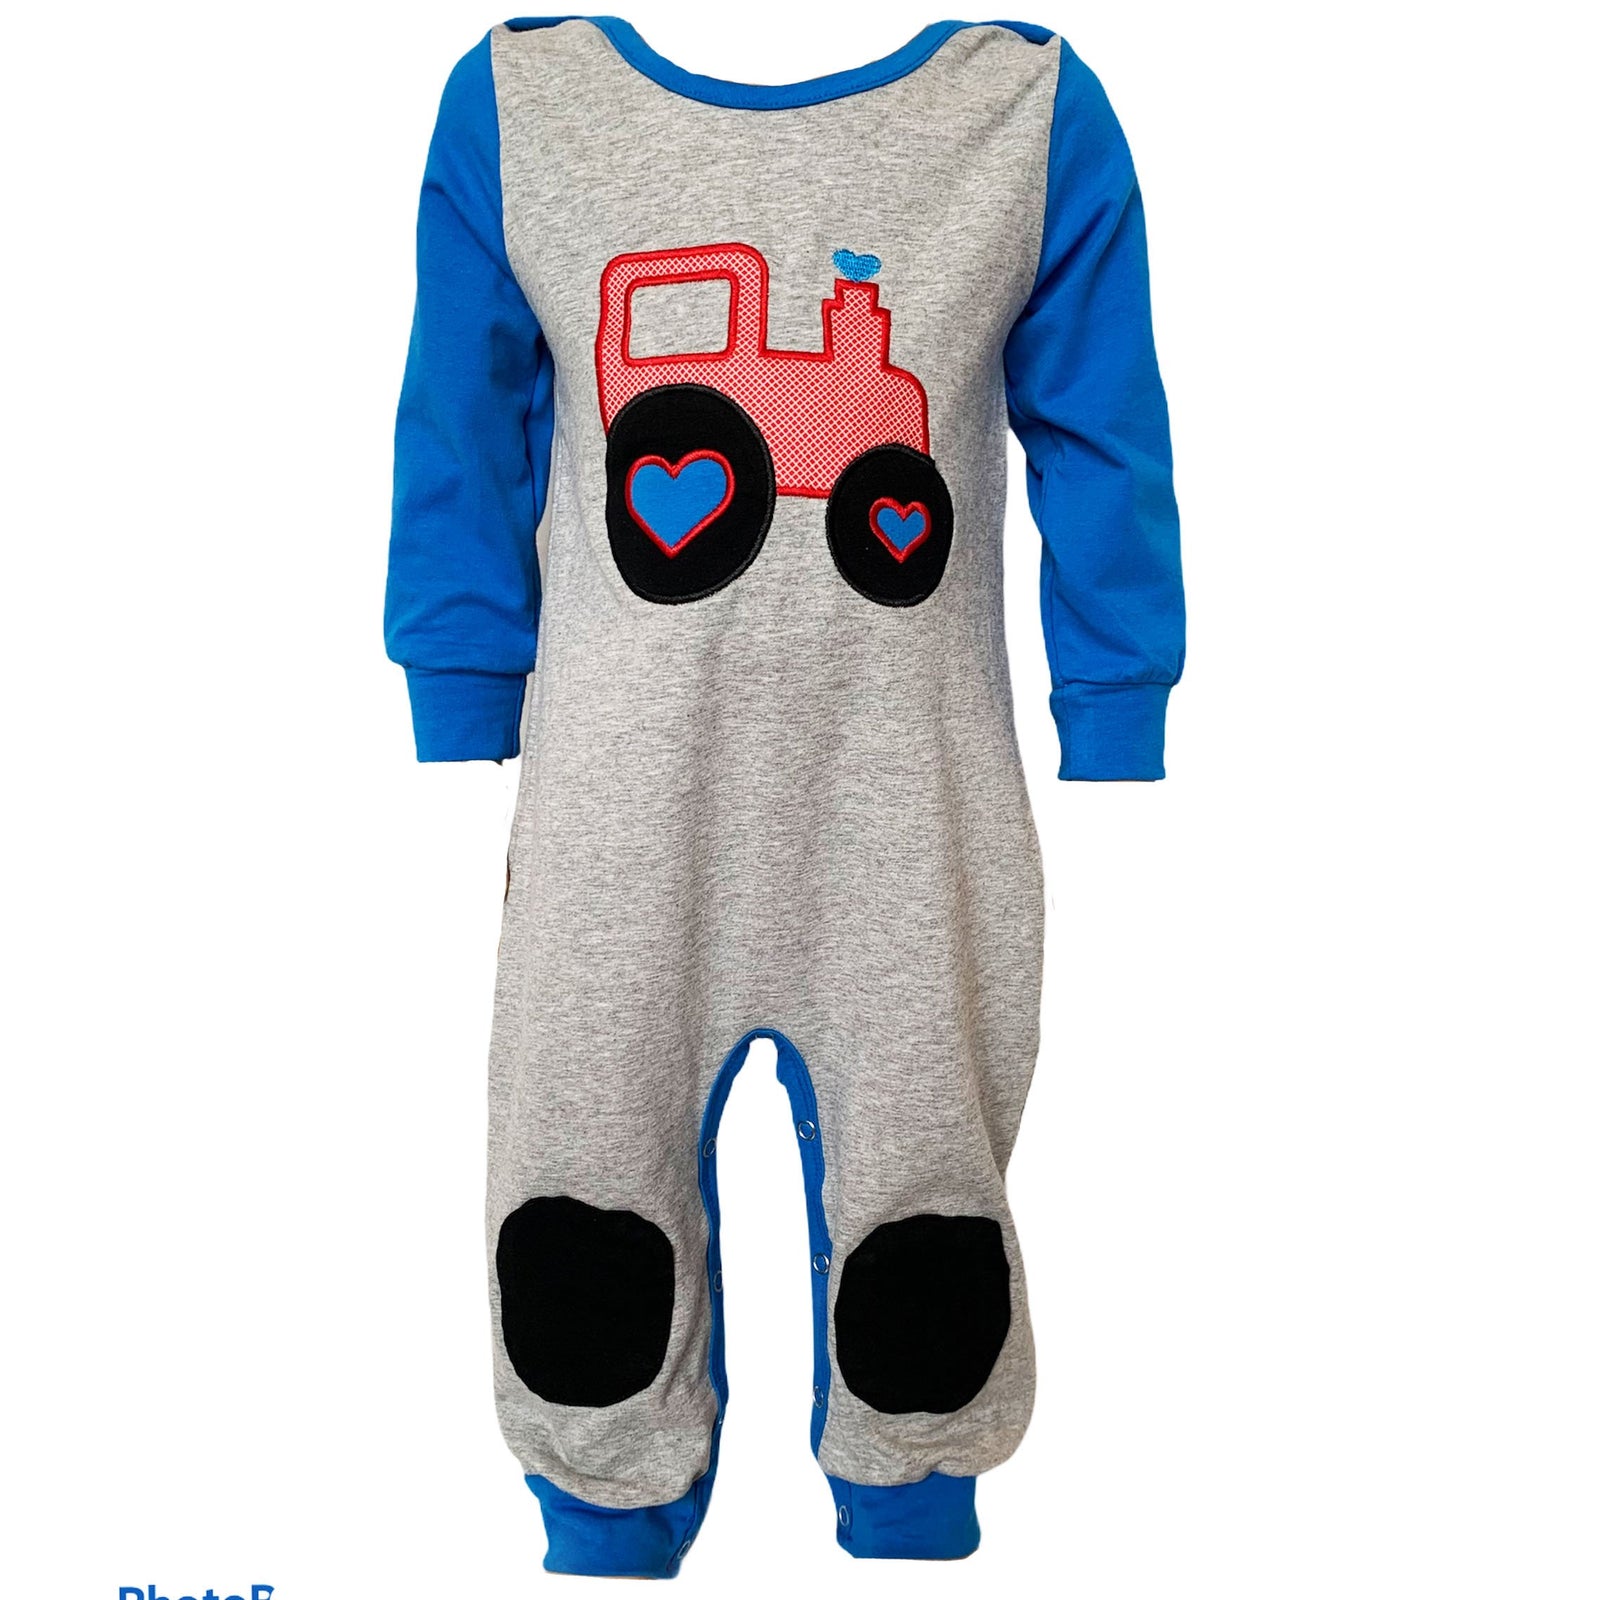 Blue and Grey Long Sleeve Truck Baby Toddler Boys Romper by AnnLoren